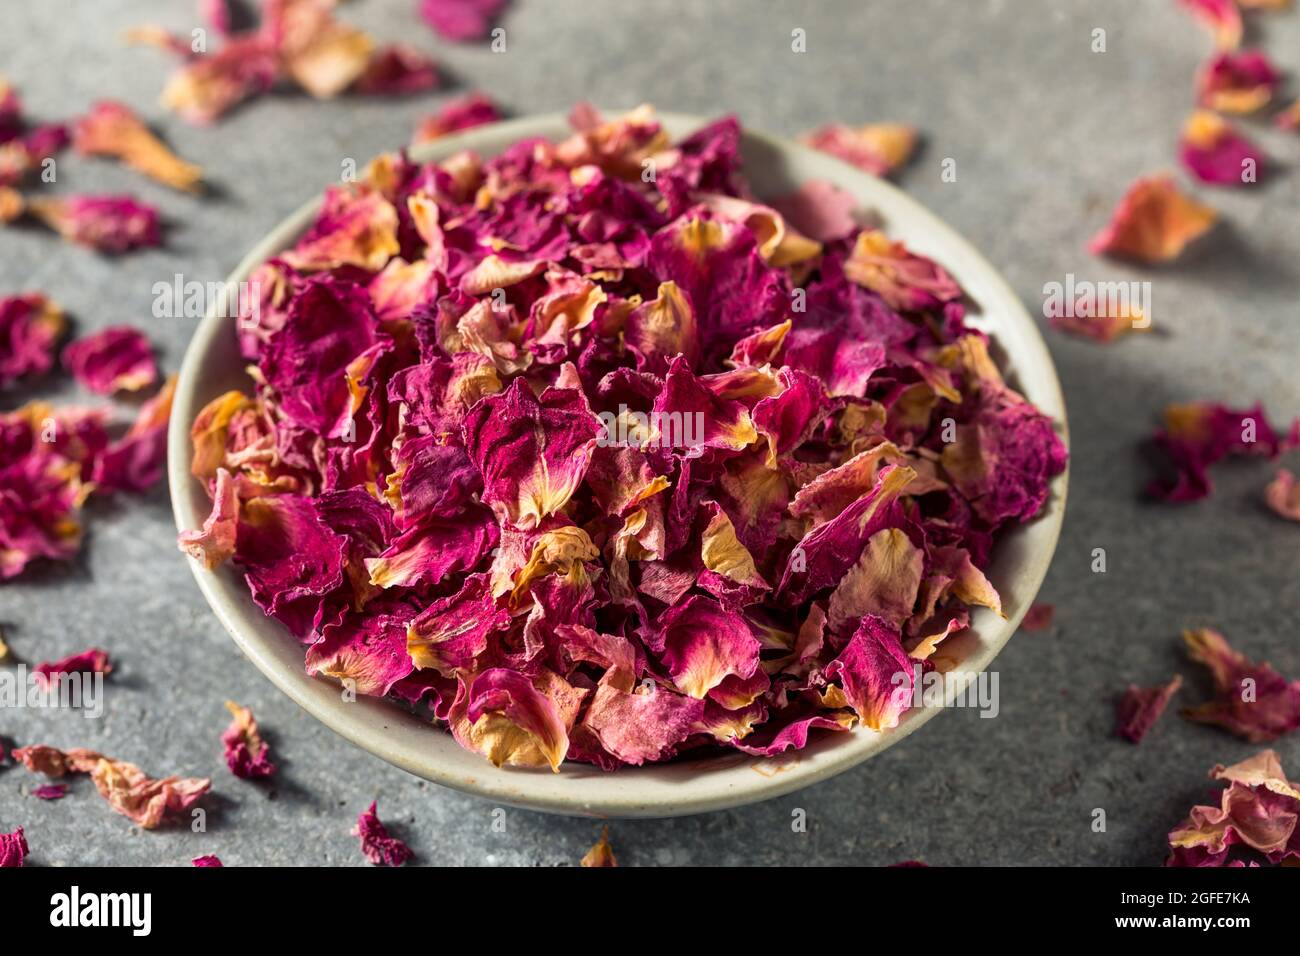 Healthy Organic Culinary Rose Petals in a Bowl Stock Photo